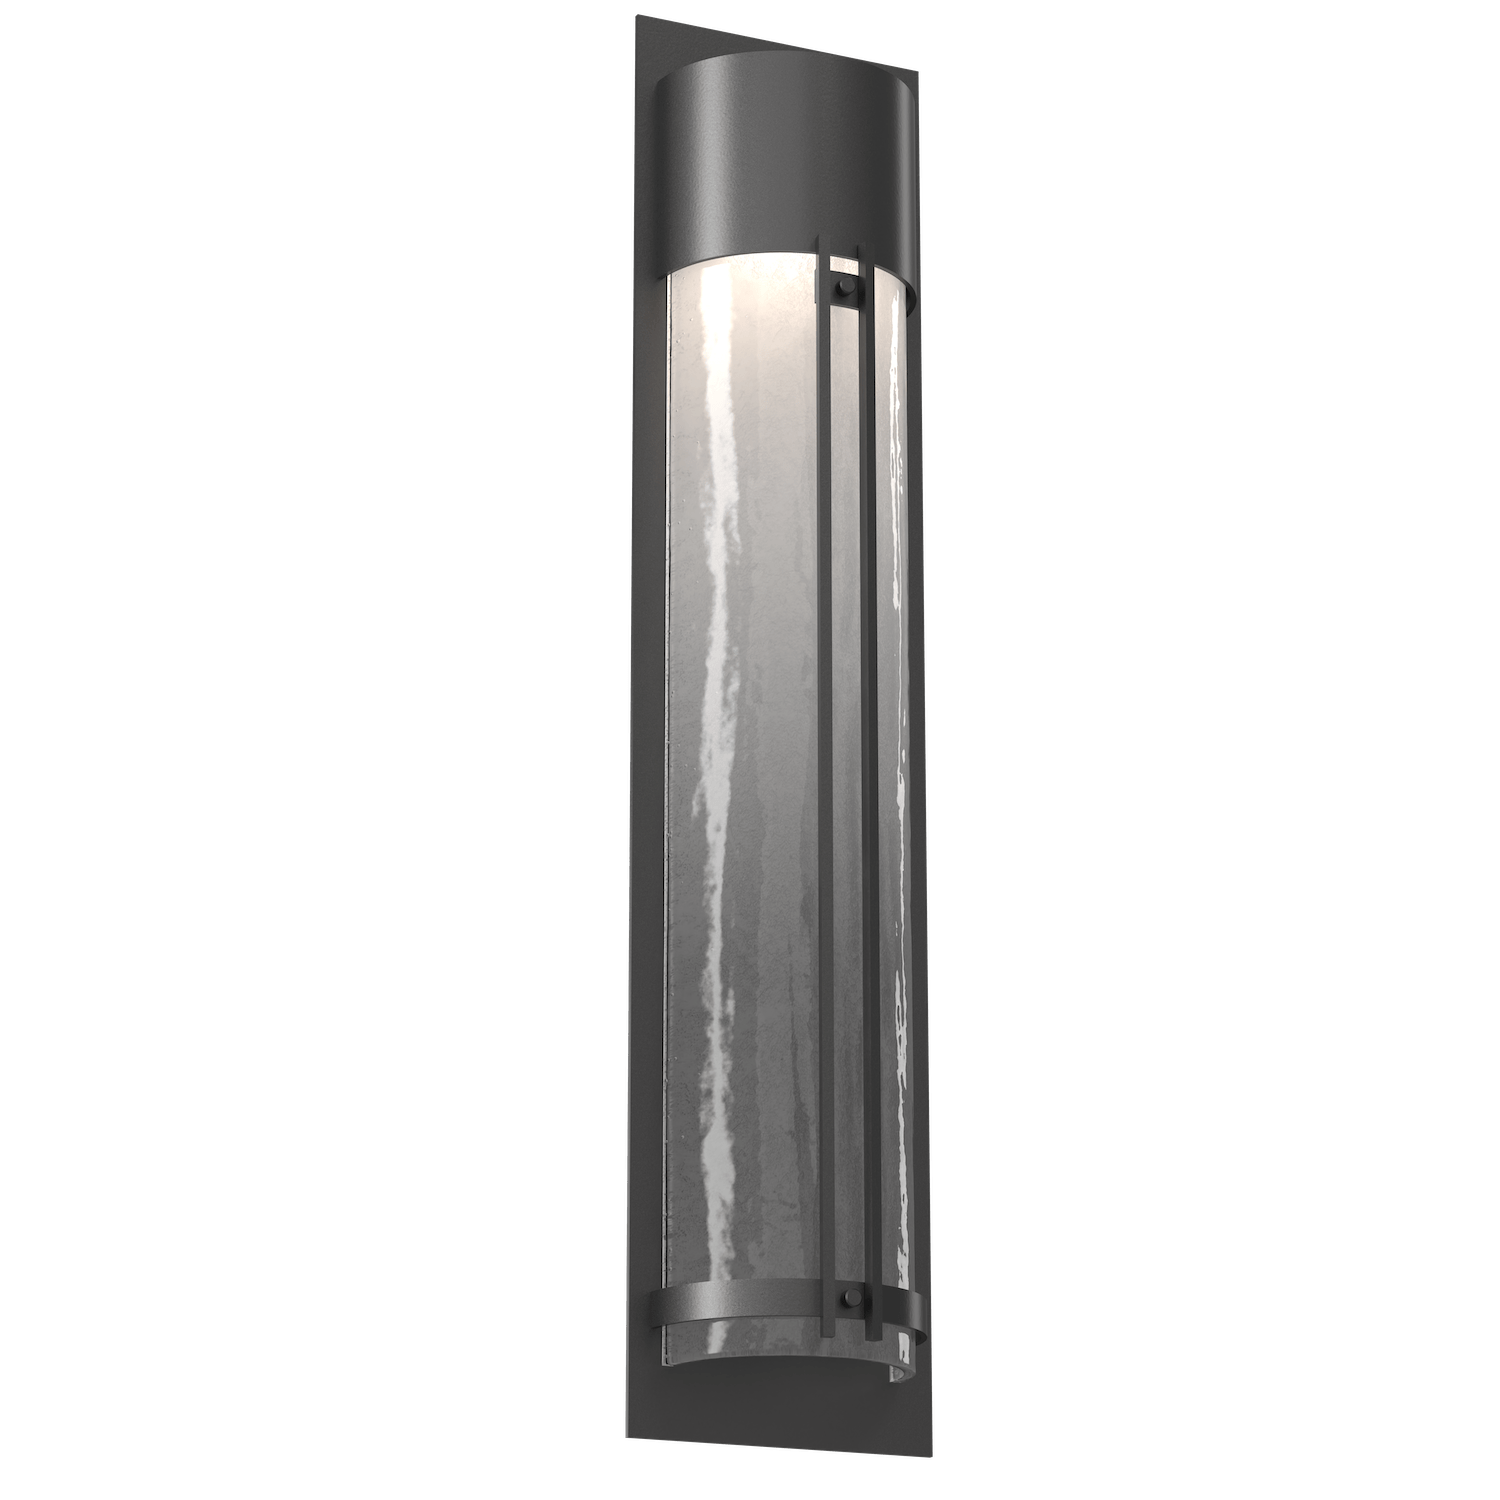 Hammerton Studio Half Round Cover LED Sconce Outdoor l Wall Hammerton Studio 31 Argento Grey (Outdoor) Frosted Granite